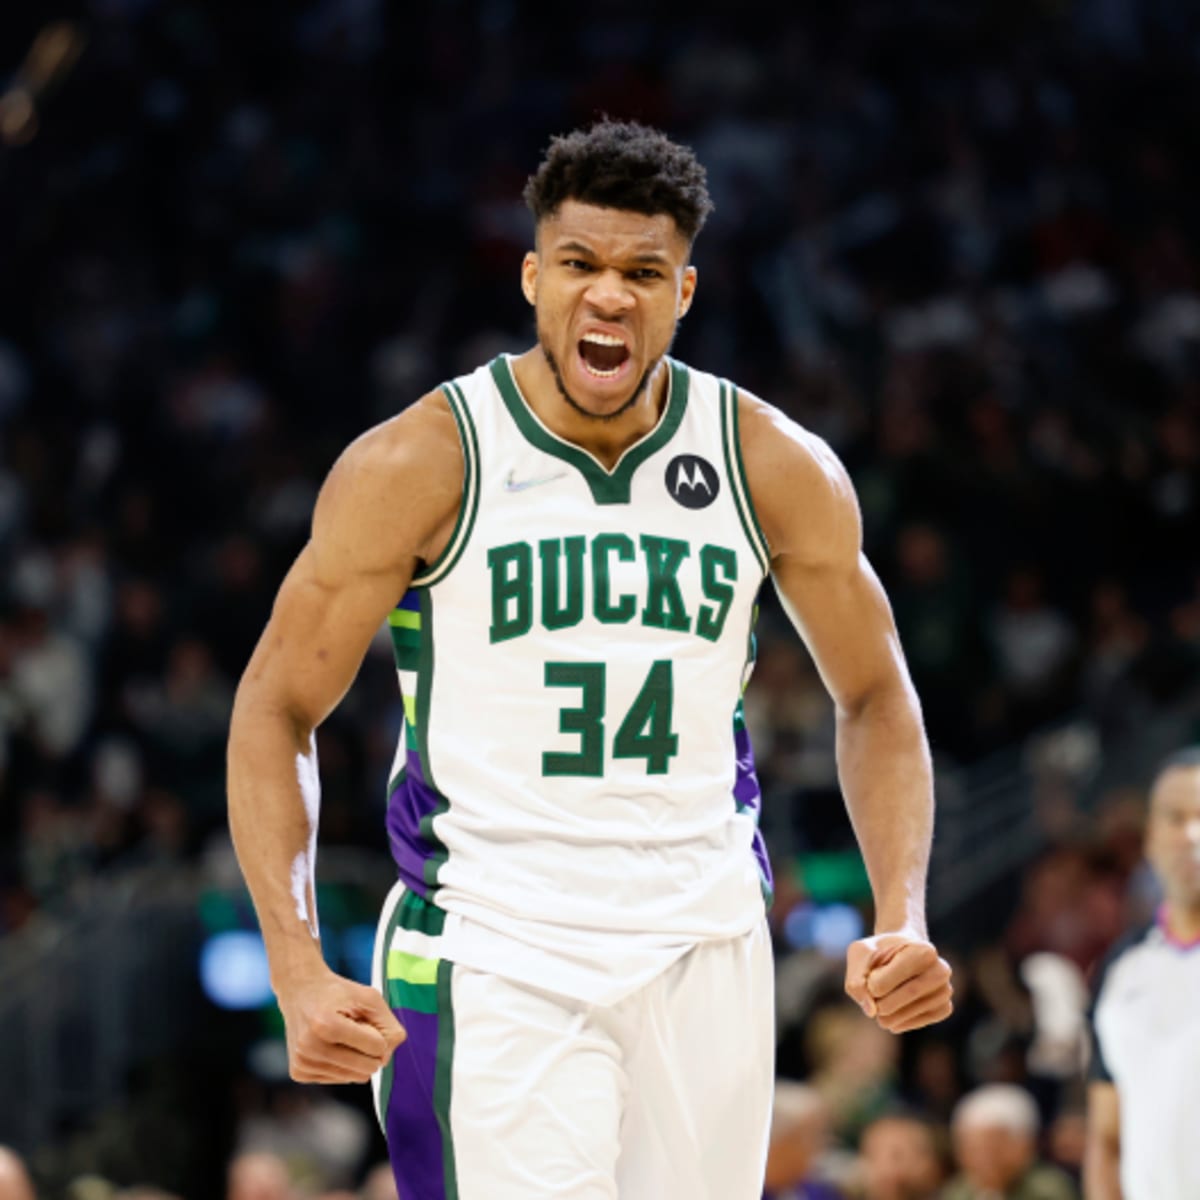 UNDEFEATED INC. - Giannis Antetokounmpo in the UNDEFEATED